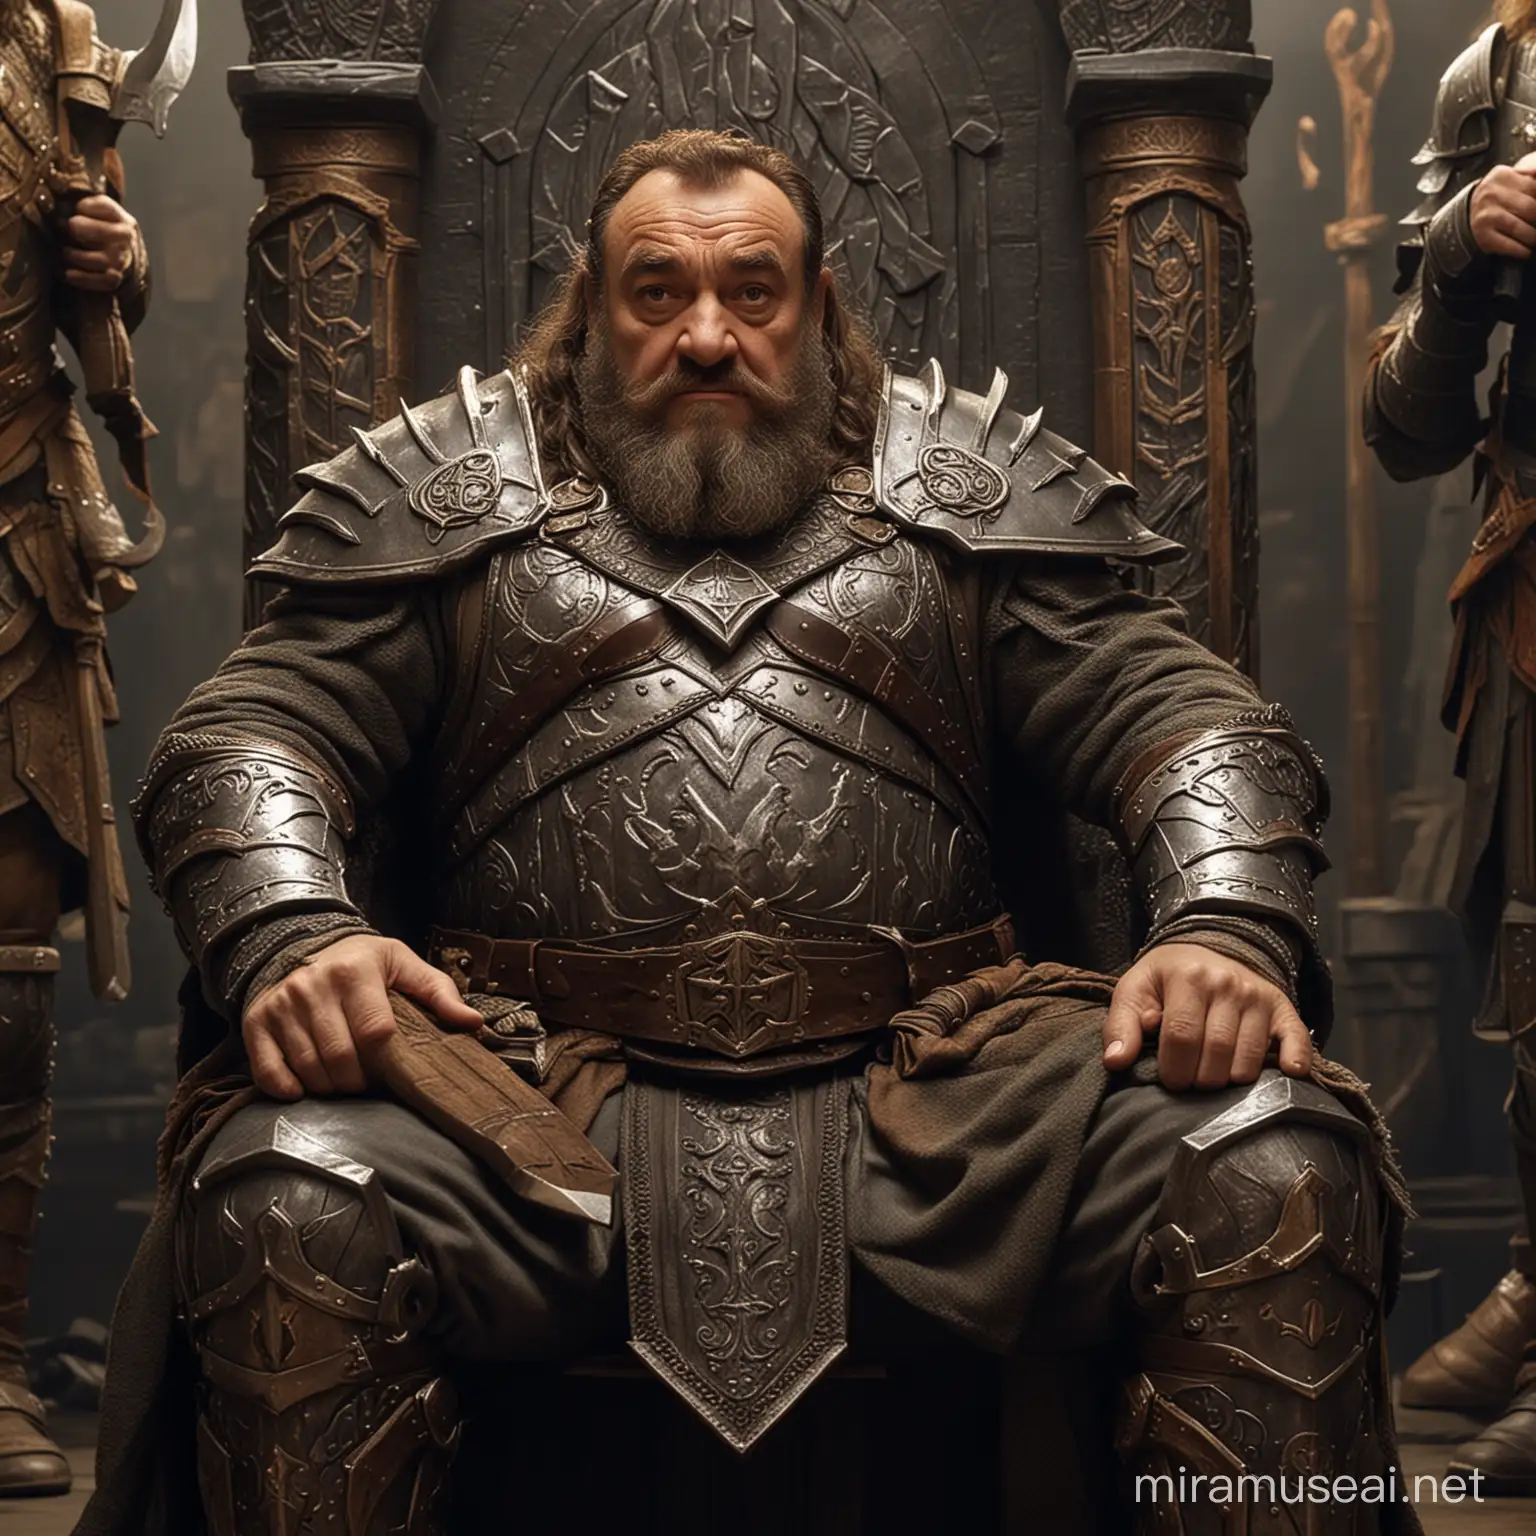 John Rhys-Davies as muscular dwarven king in a throne room, clad in armor with a gigant axe in lap